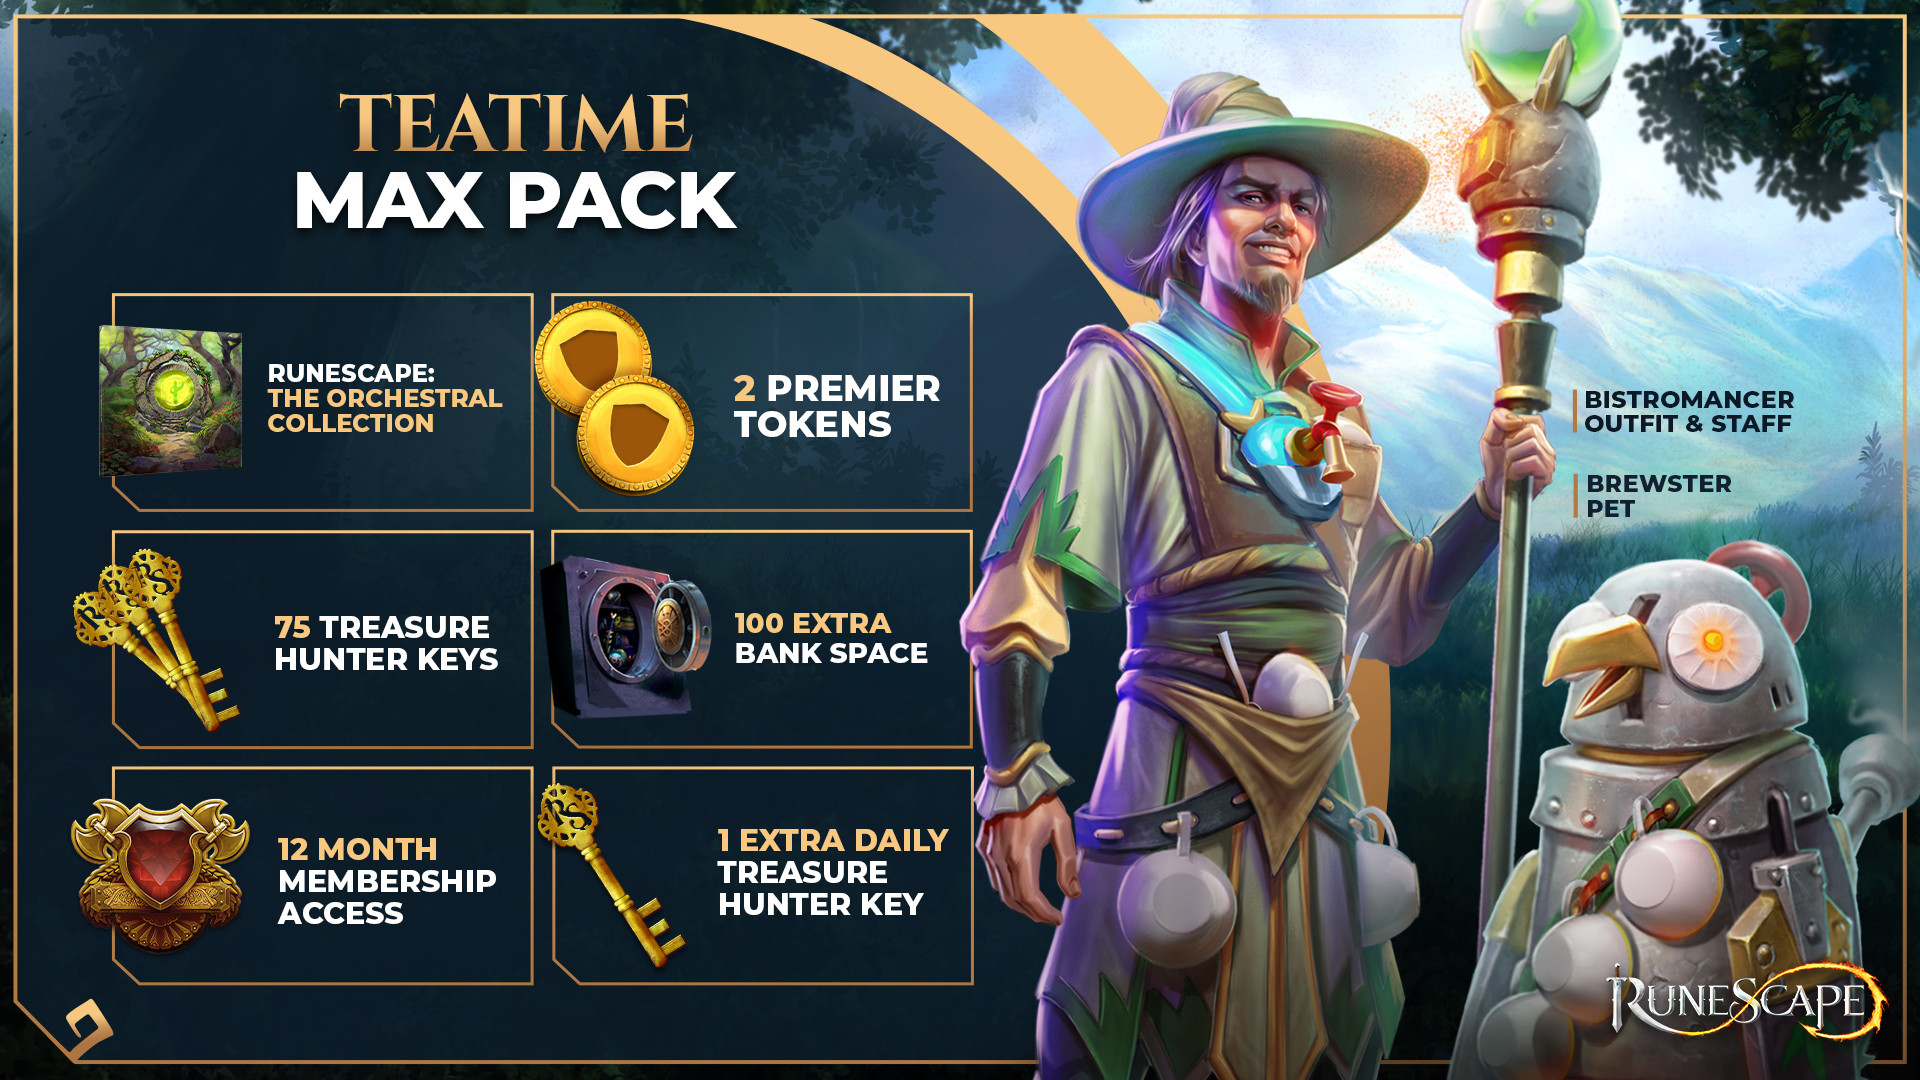 Runescape - Max Pack + 12 Months Membership Manual Delivery $56.49